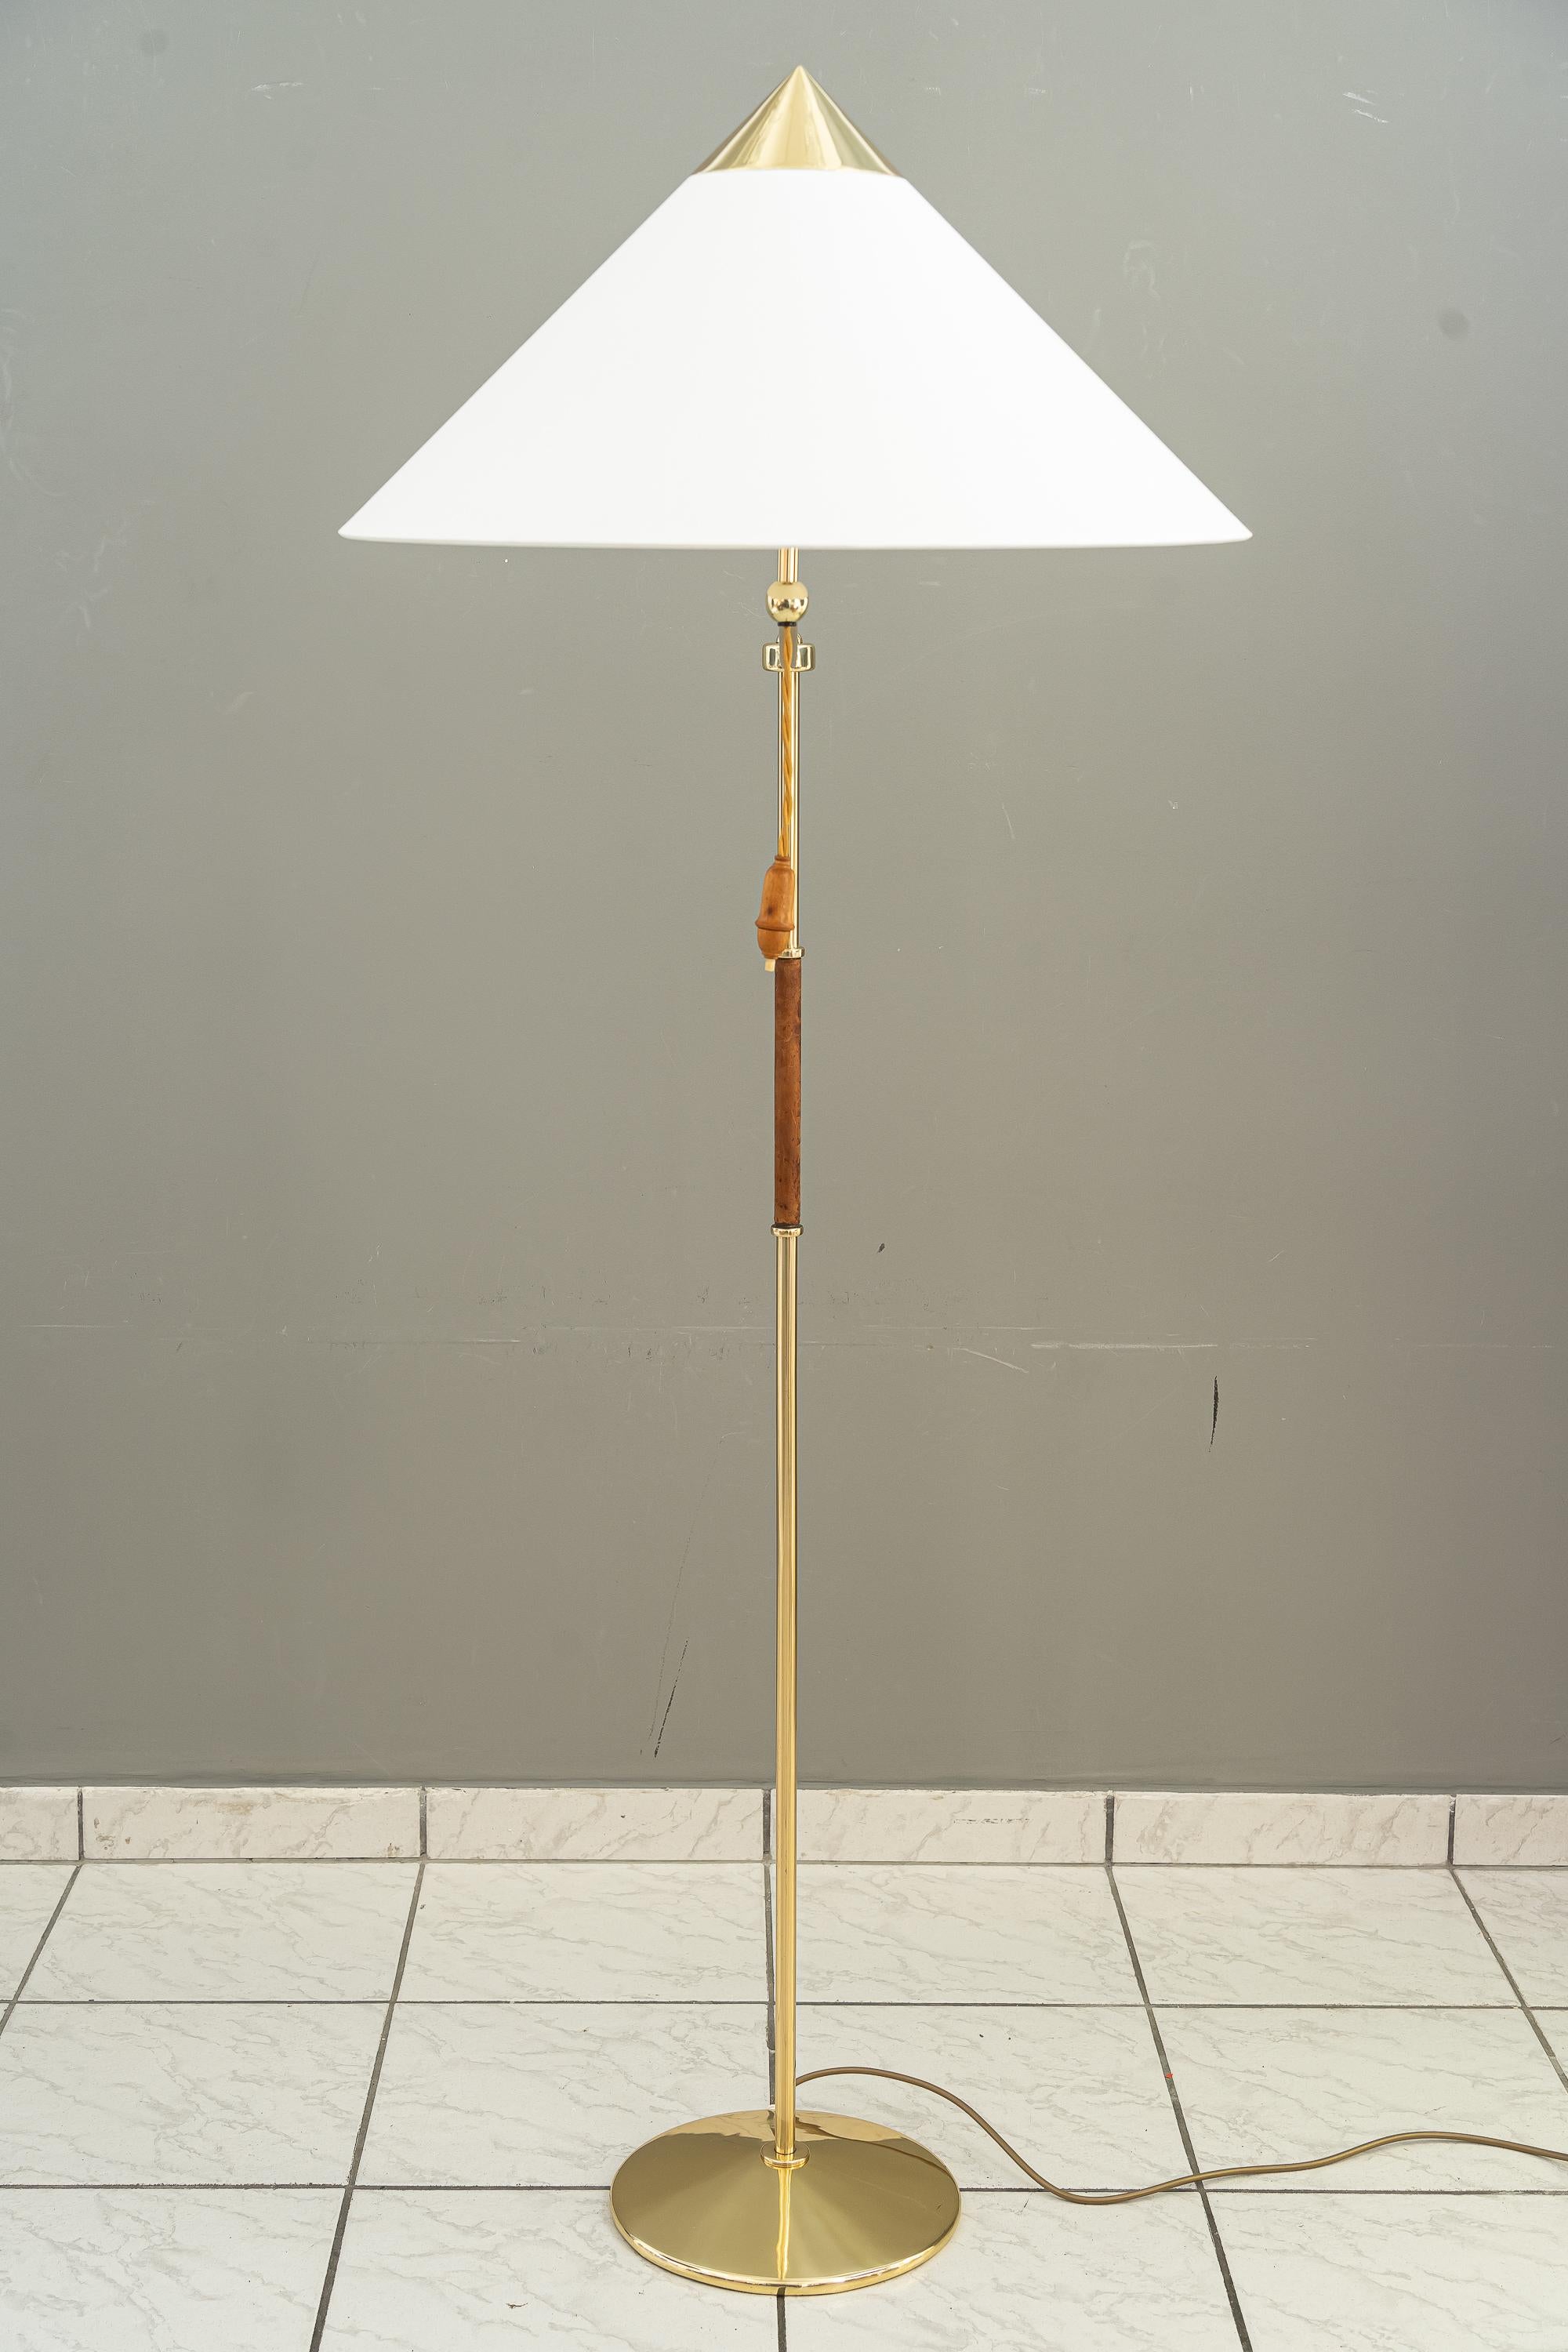 Lacquered Rare Floor Lamp by Josef Frank for J.T.Kalmar Around 1950s For Sale